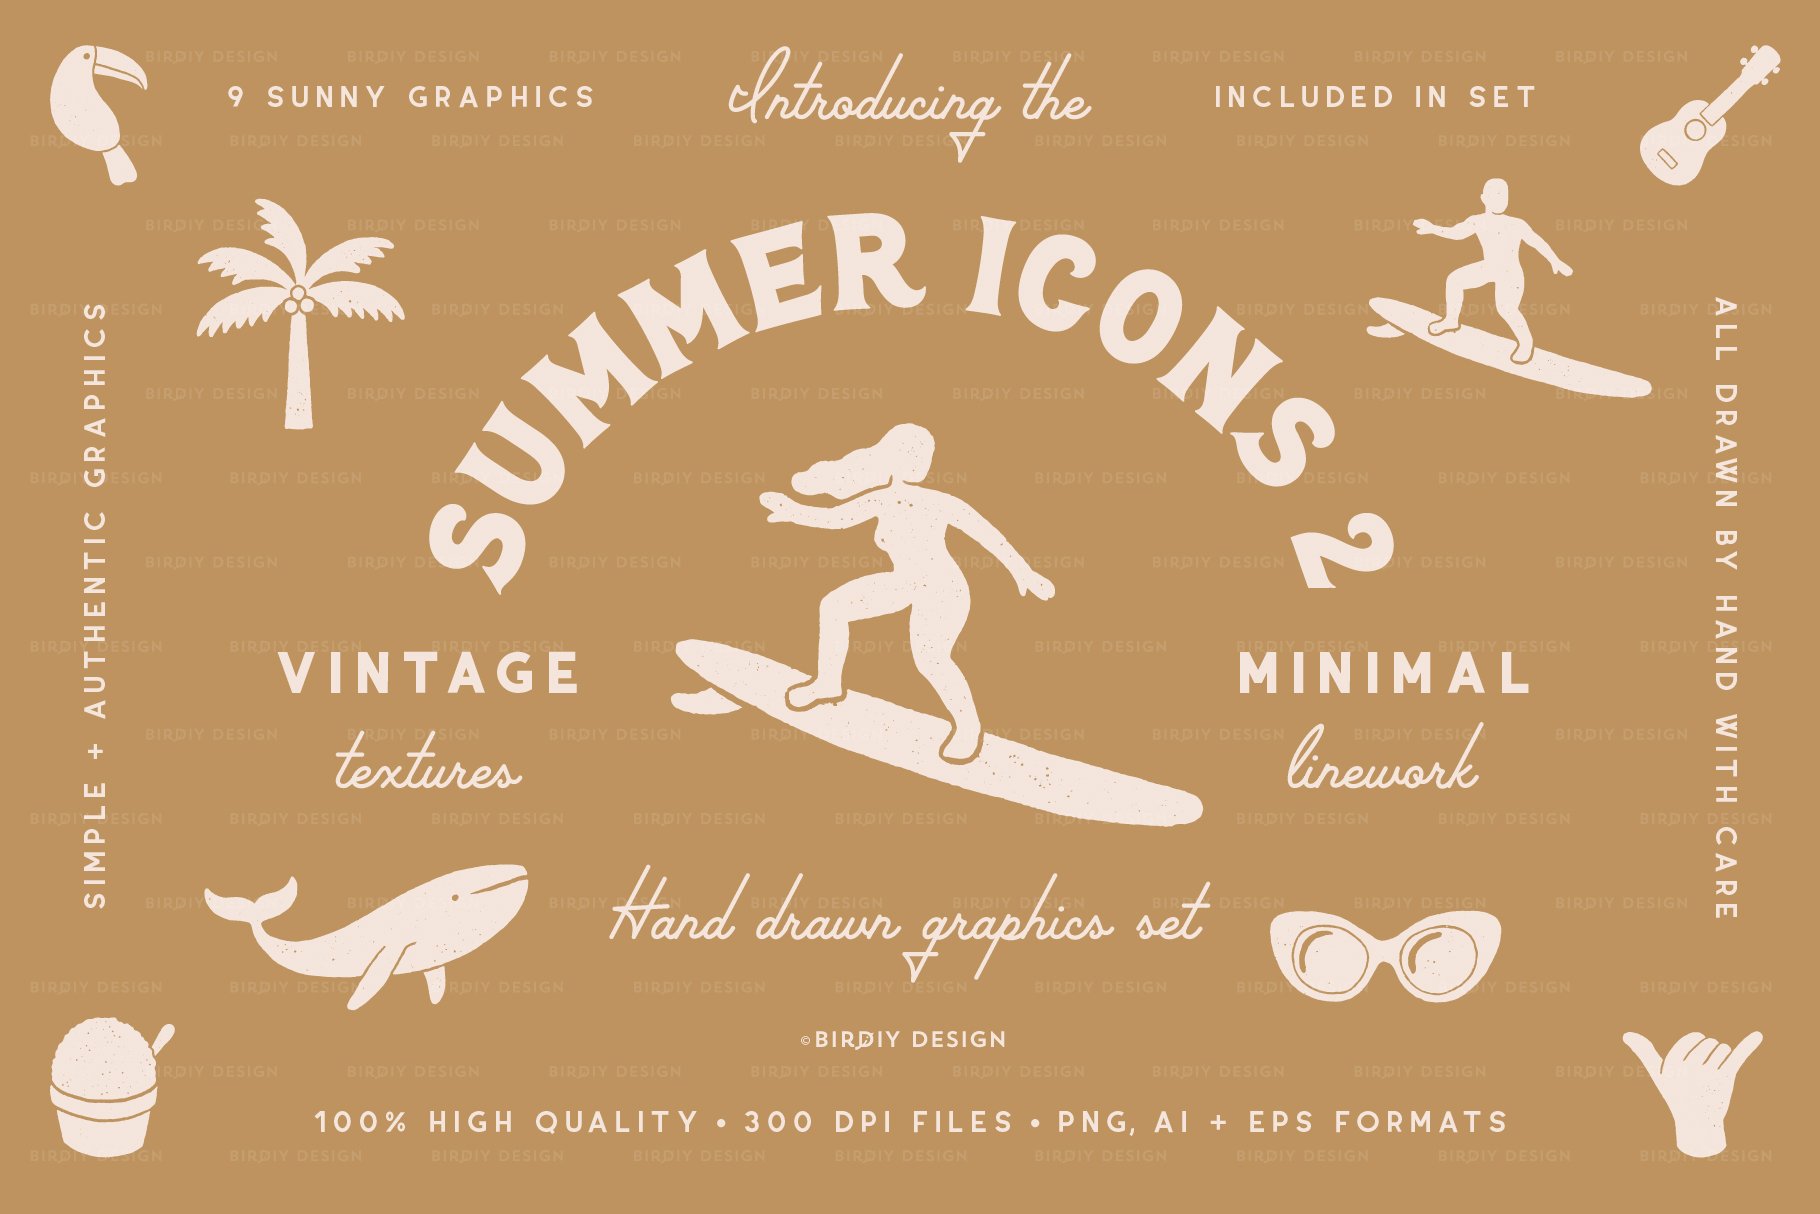 Summer Icons 2 Hand Drawn Graphics cover image.